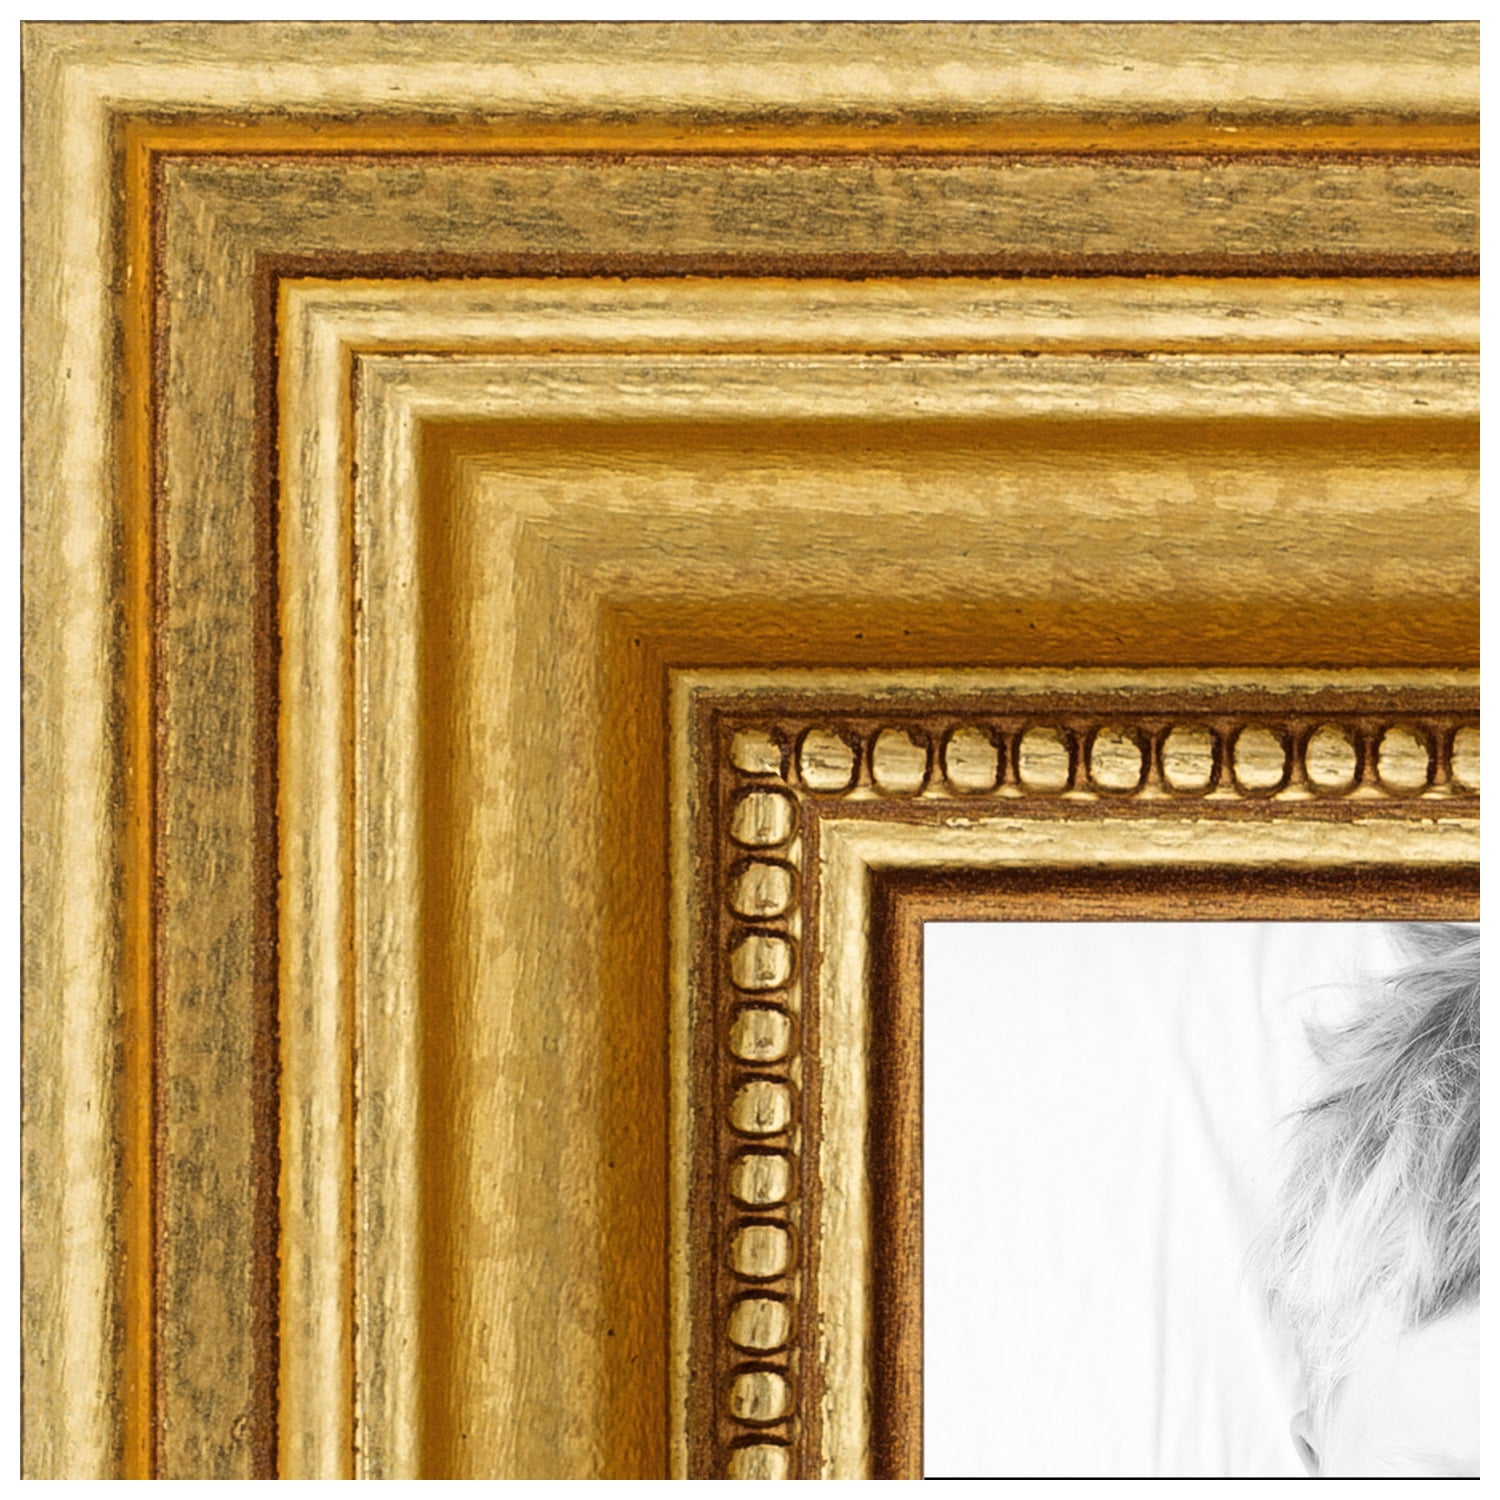 2WOMB-847-2186-11x24 ArtToFrames 11x24 inch Gold Foil with Steps Wood Picture Frame